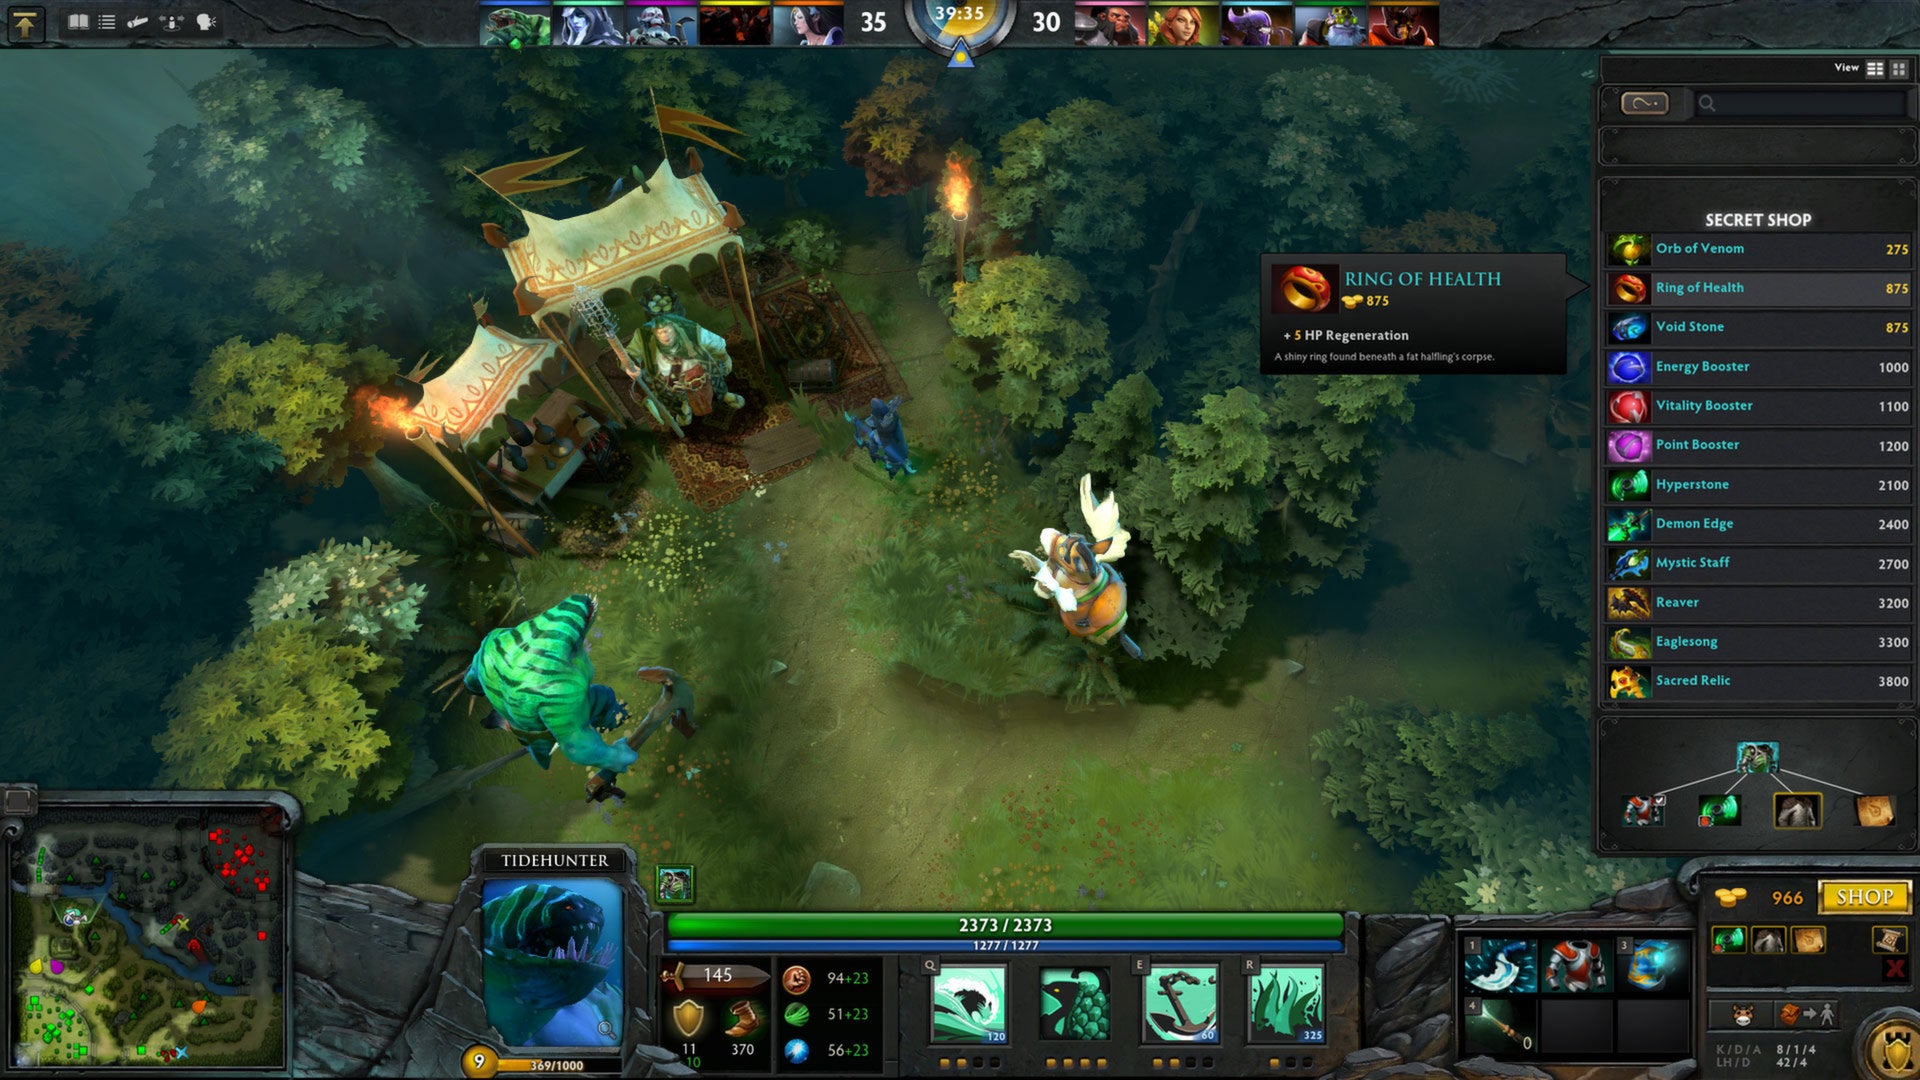 Dota 2 launches properly as two years of beta come to an end Eurogamer